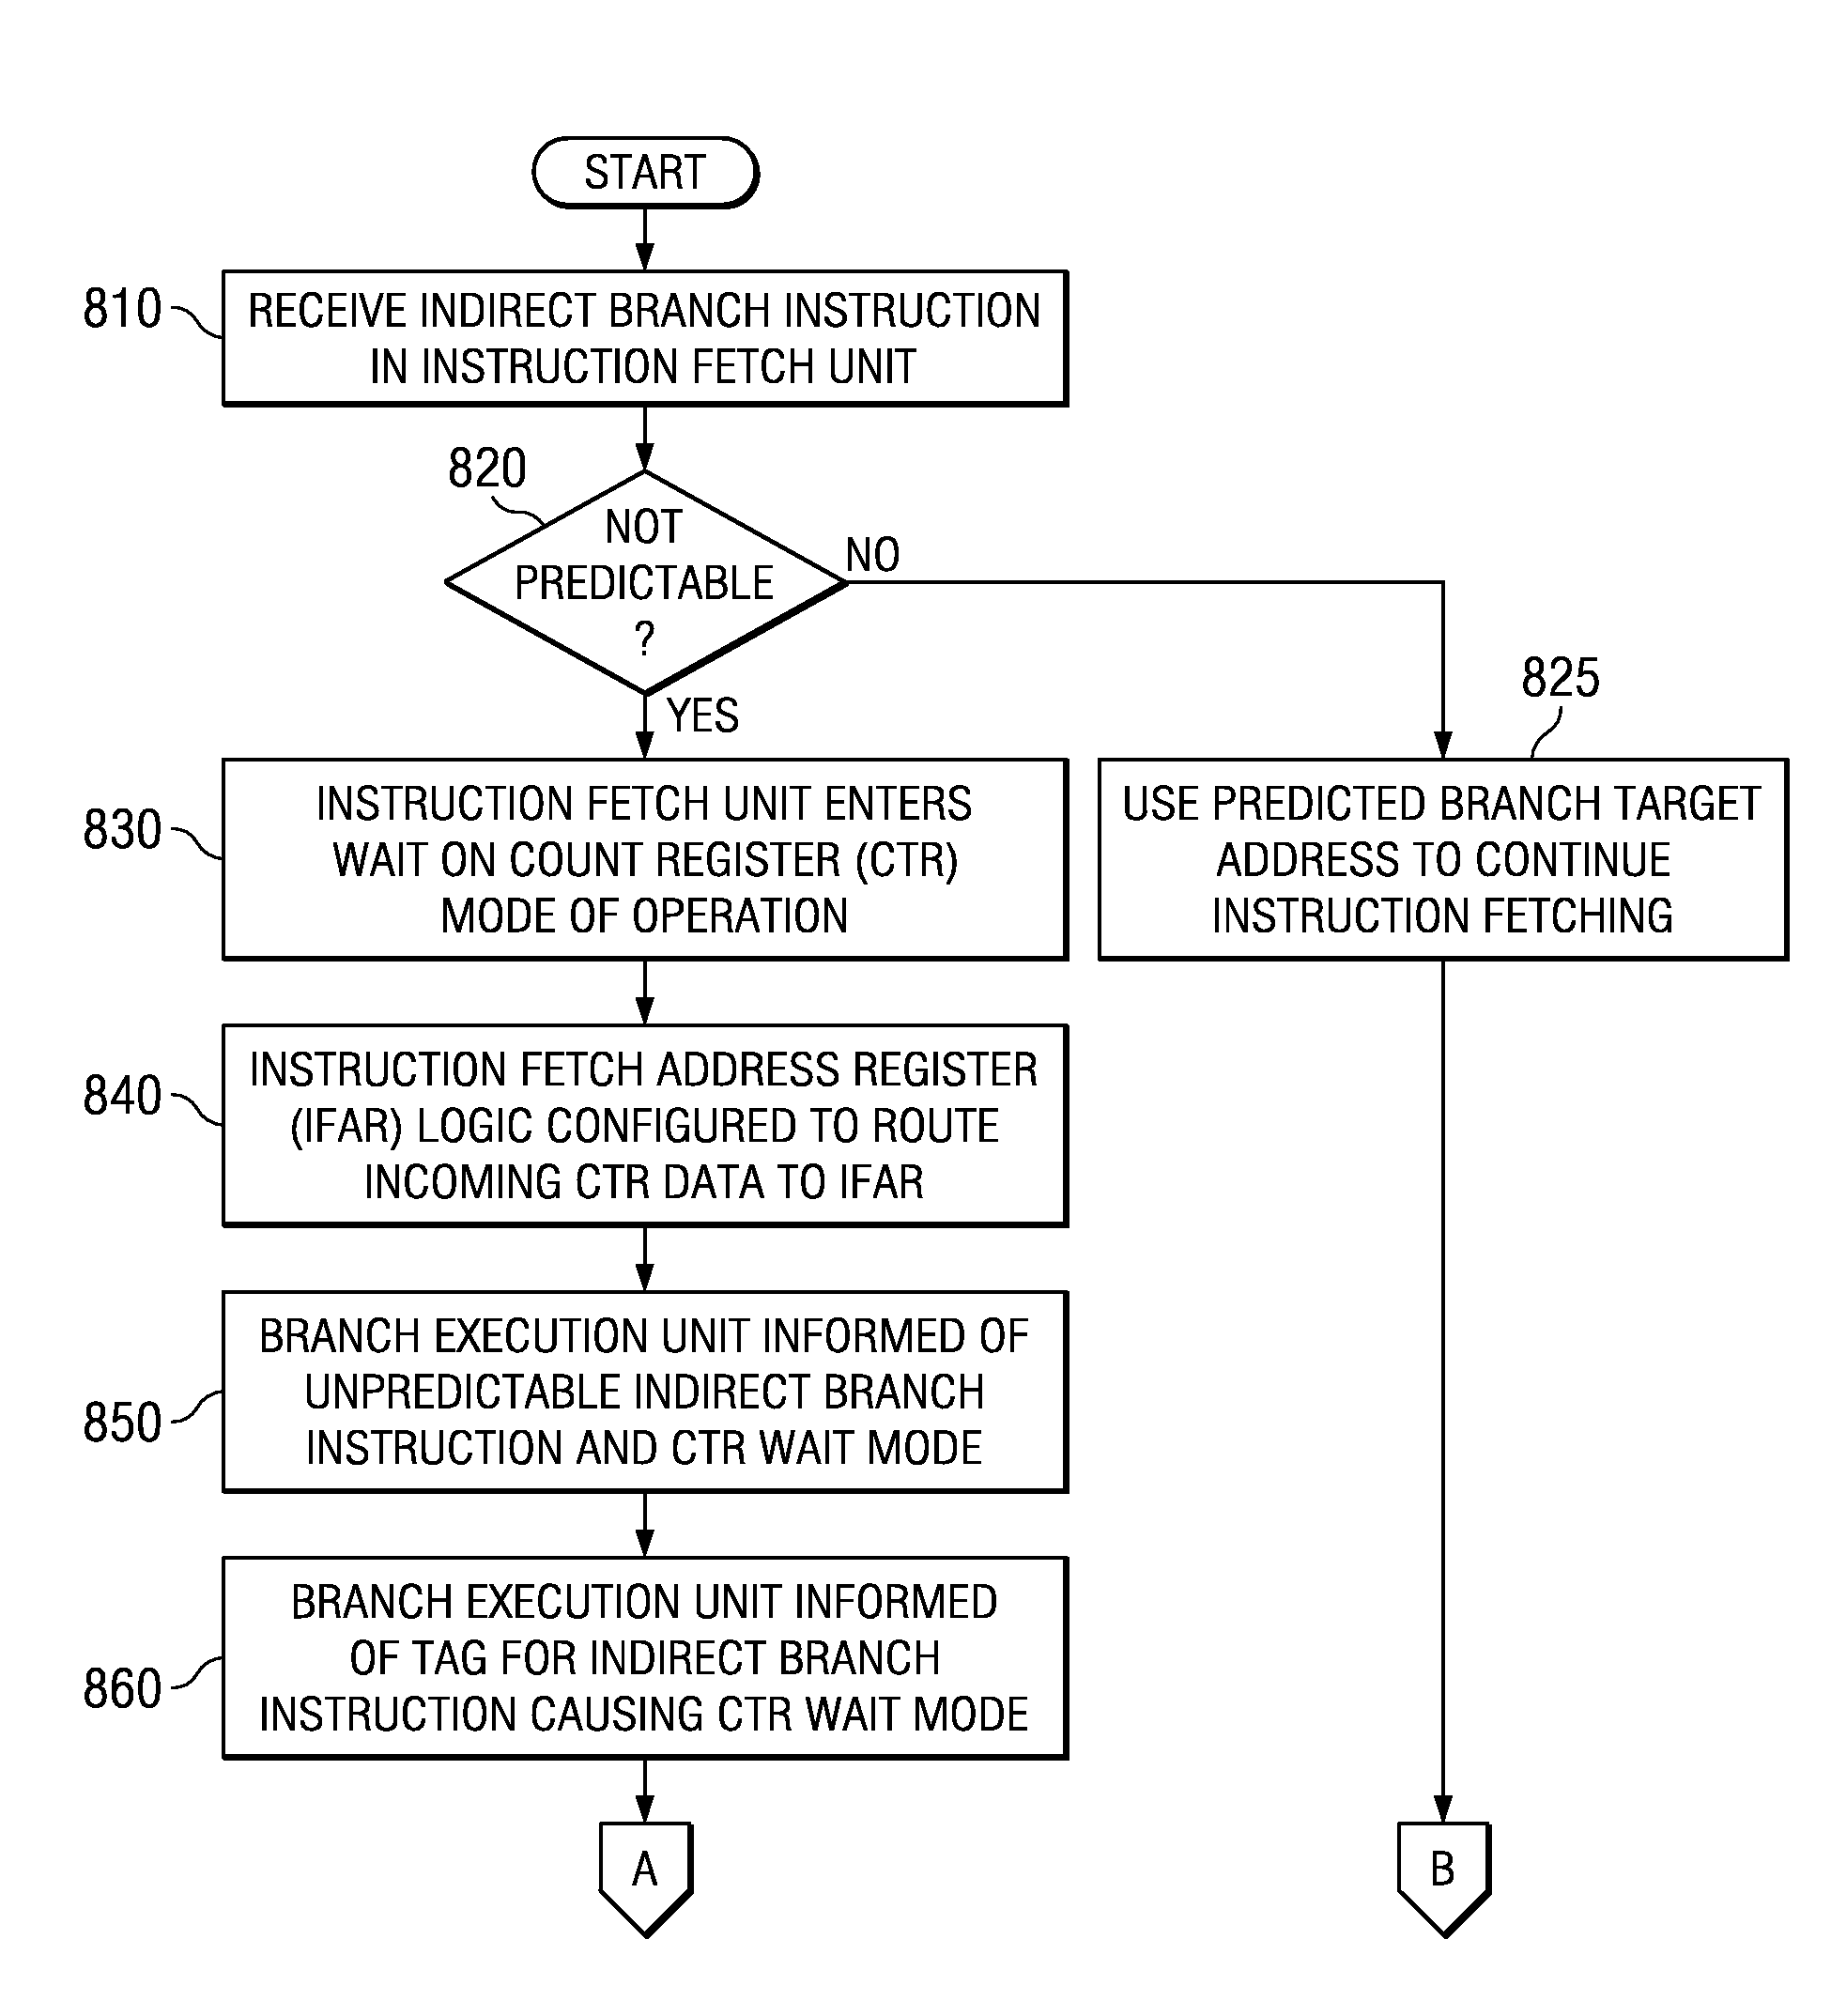 System and Method for Optimizing Branch Logic for Handling Hard to Predict Indirect Branches